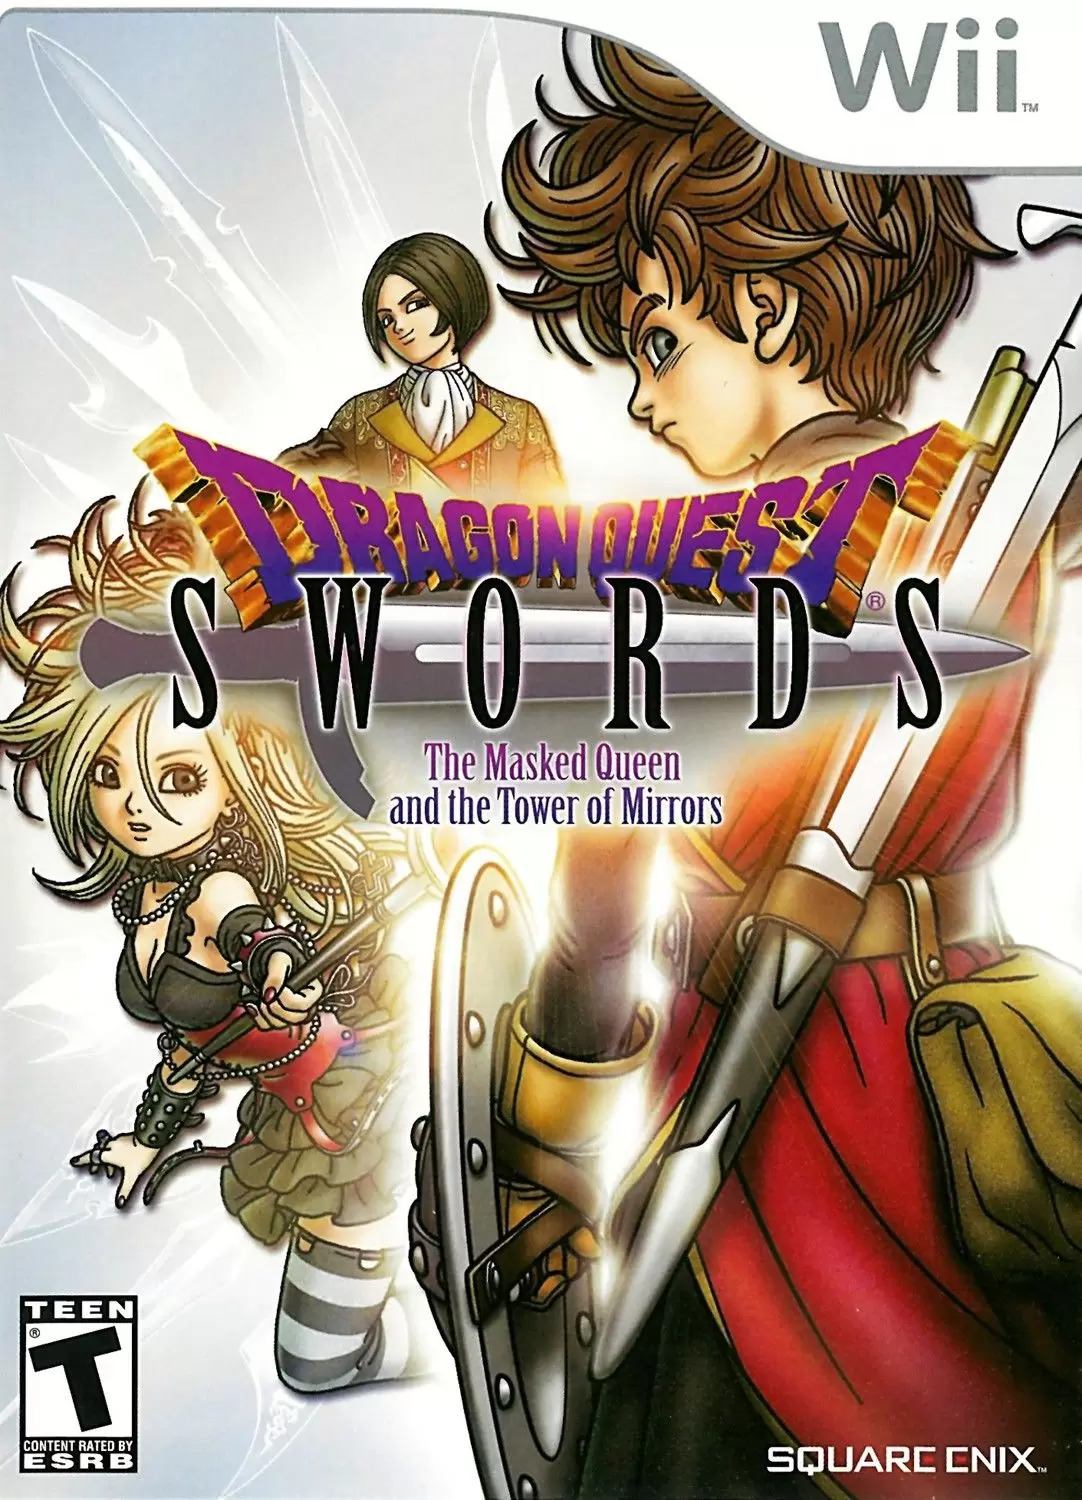 Nintendo Wii Games - Dragon Quest Swords: The Masked Queen and the Tower of Mirrors